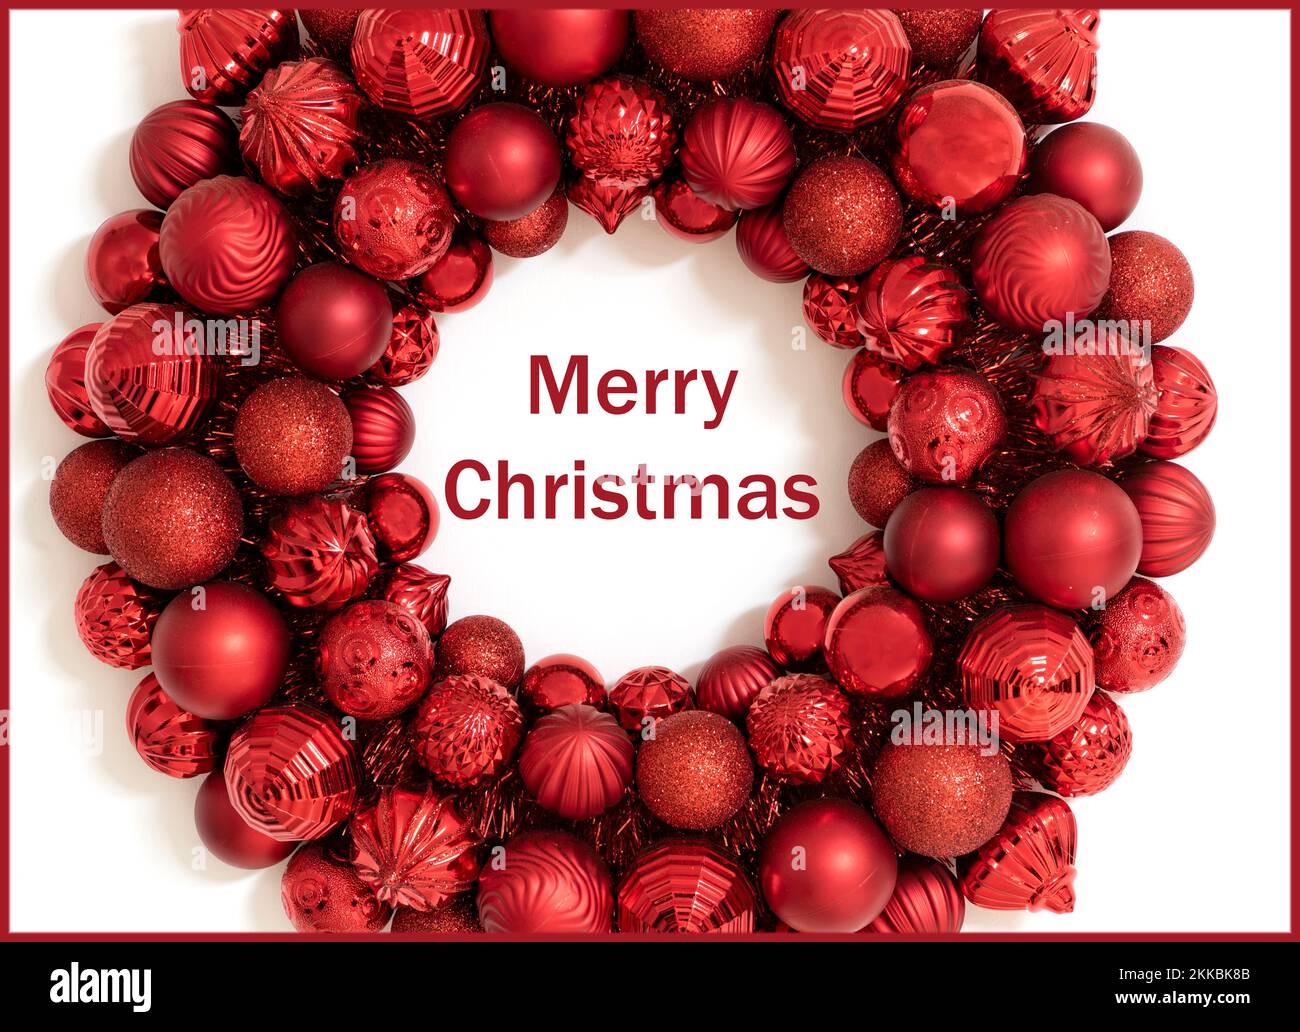 Merry Christmas holiday greeting card or background with green Happy Holidays text.  Red Wreath made of red christmas ornaments. Stock Photo